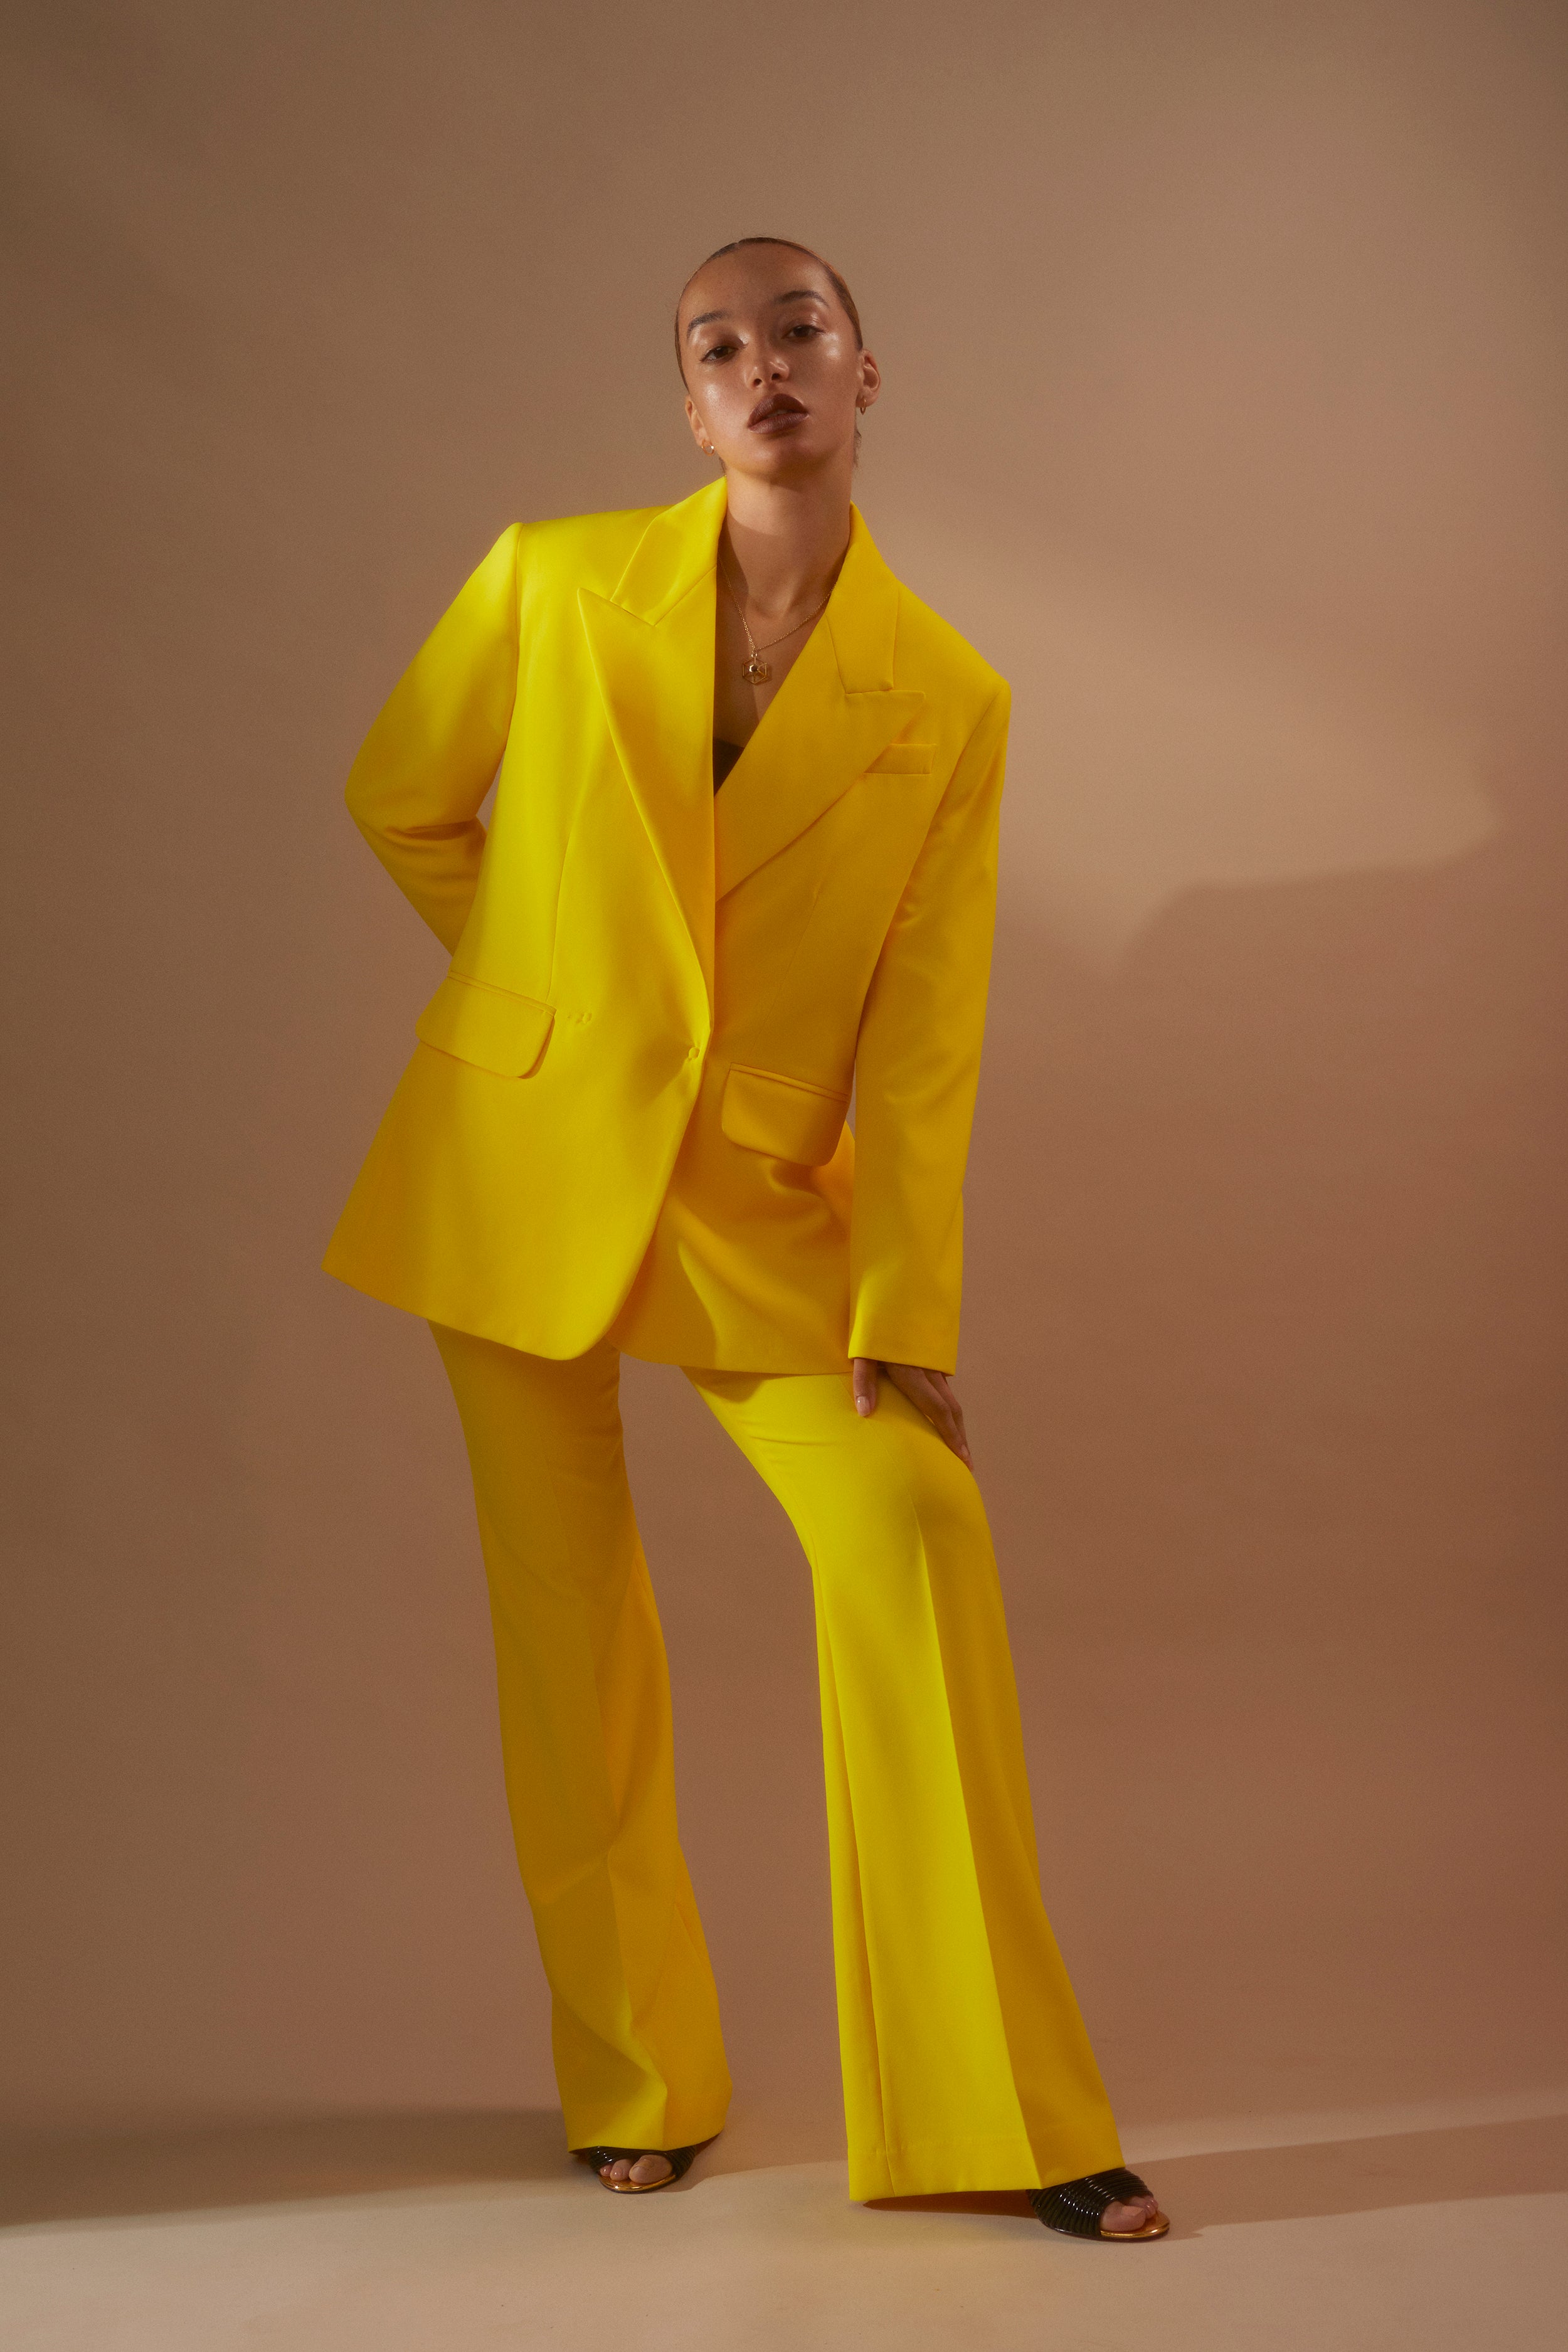 Model wearing yellow suit and Antonia Guise items on a camel background looking to camera